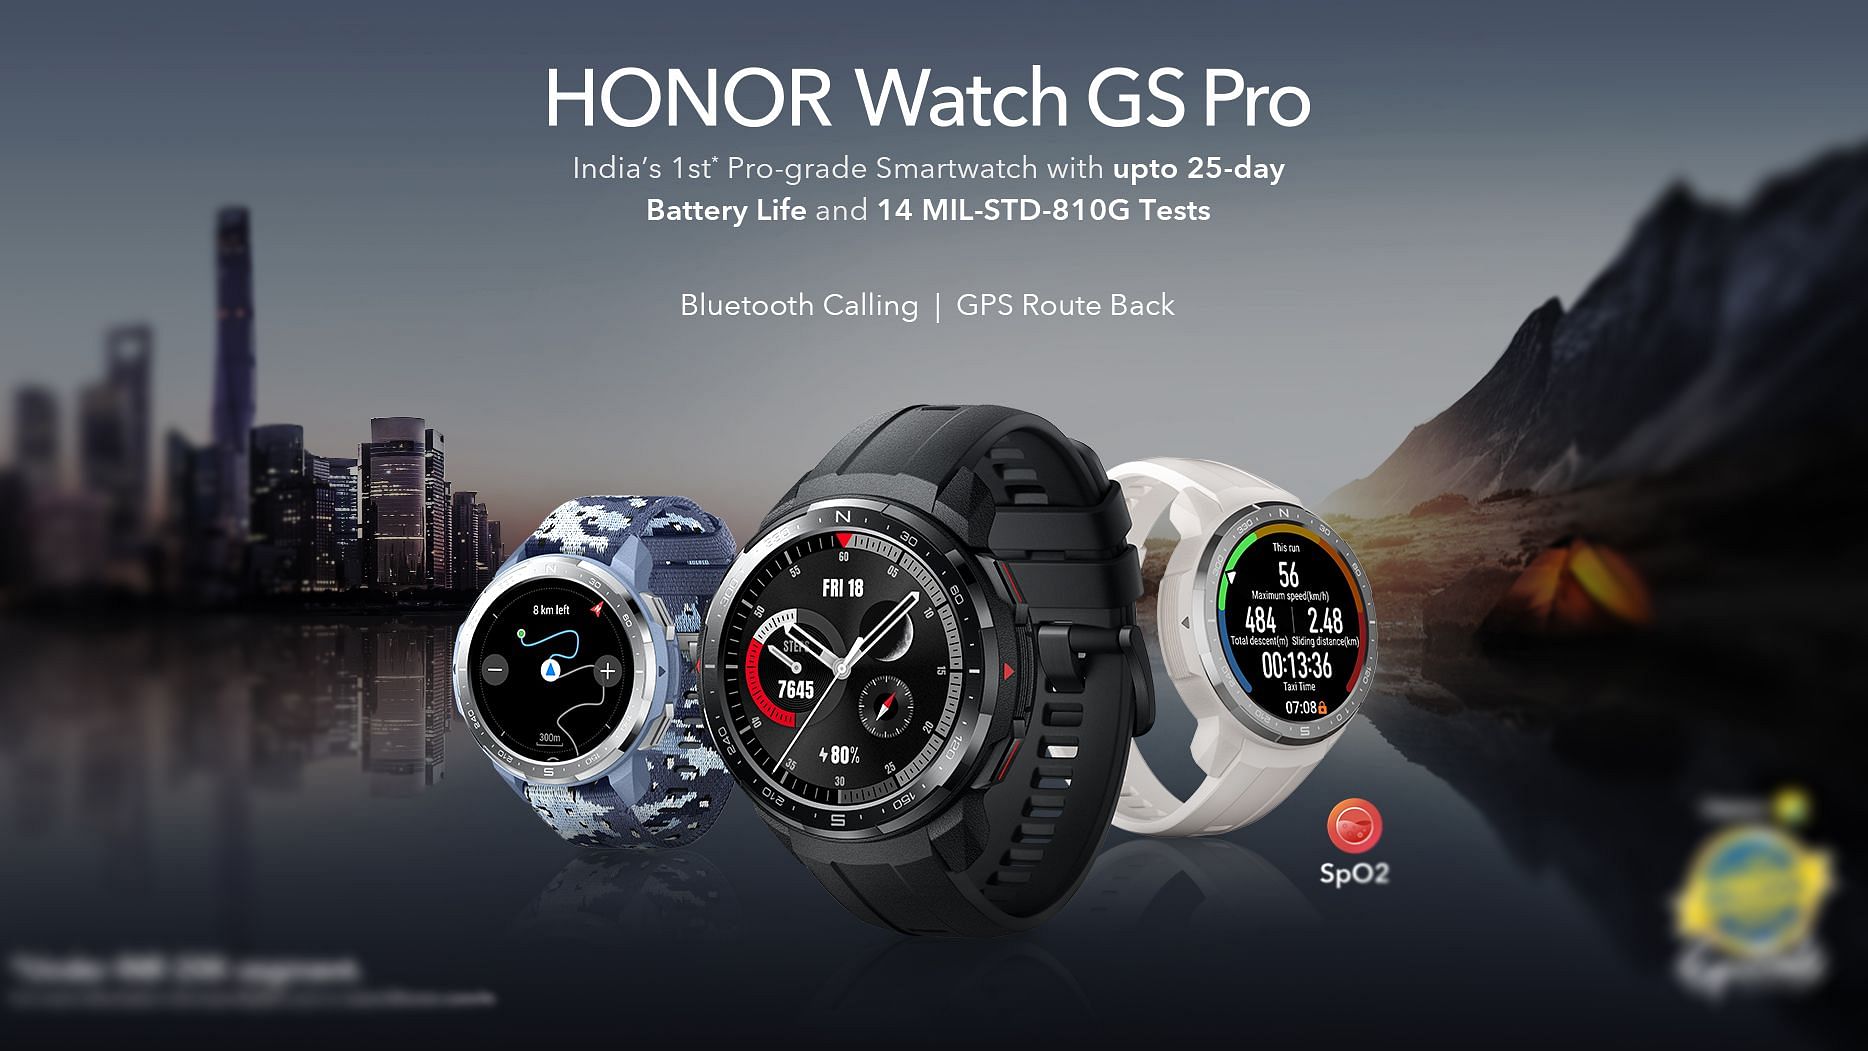 The honor Watch GS Pro is touted to offer 25 days of battery life.